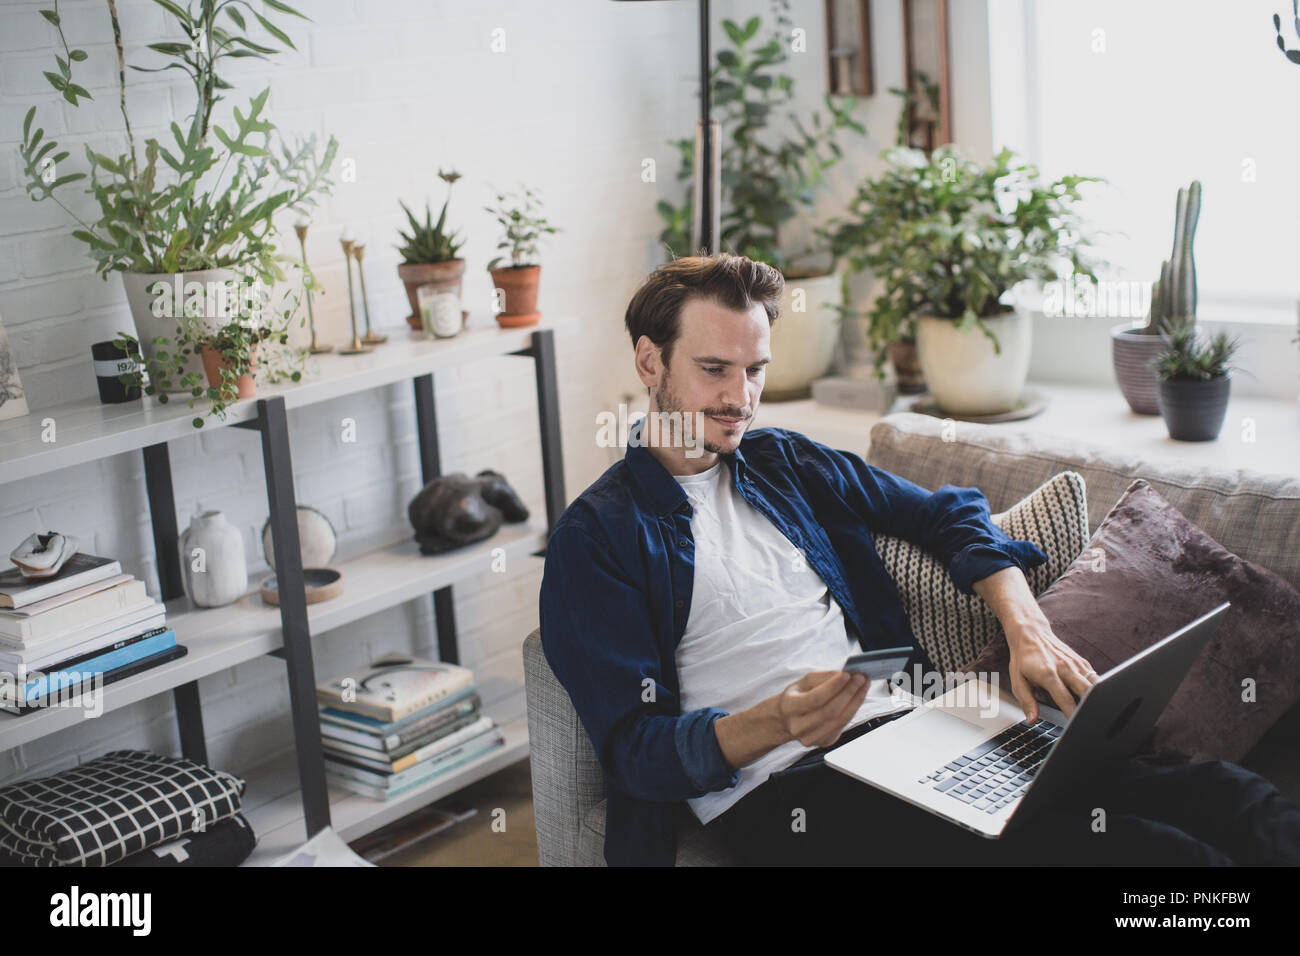 Adult male using credit card online Stock Photo